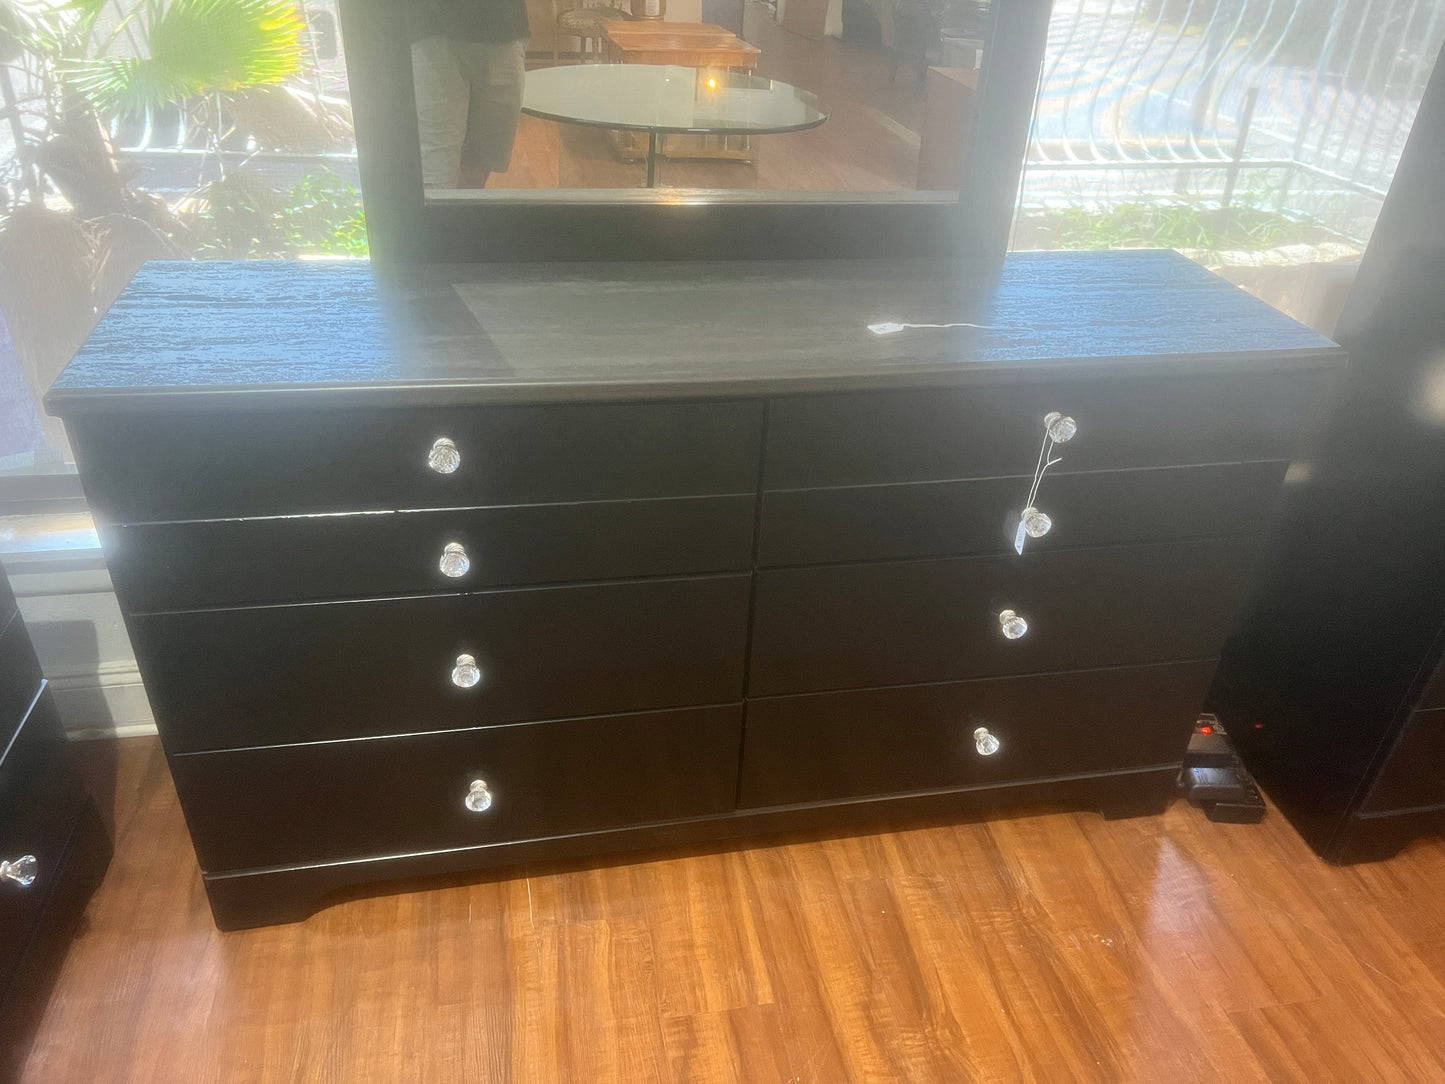 Brand new, Made in USA, Pre-assembled, 4 Piece bedroom set. Comes with 6 drawer dresser, mirror, 5 chest of drawers, and night stands